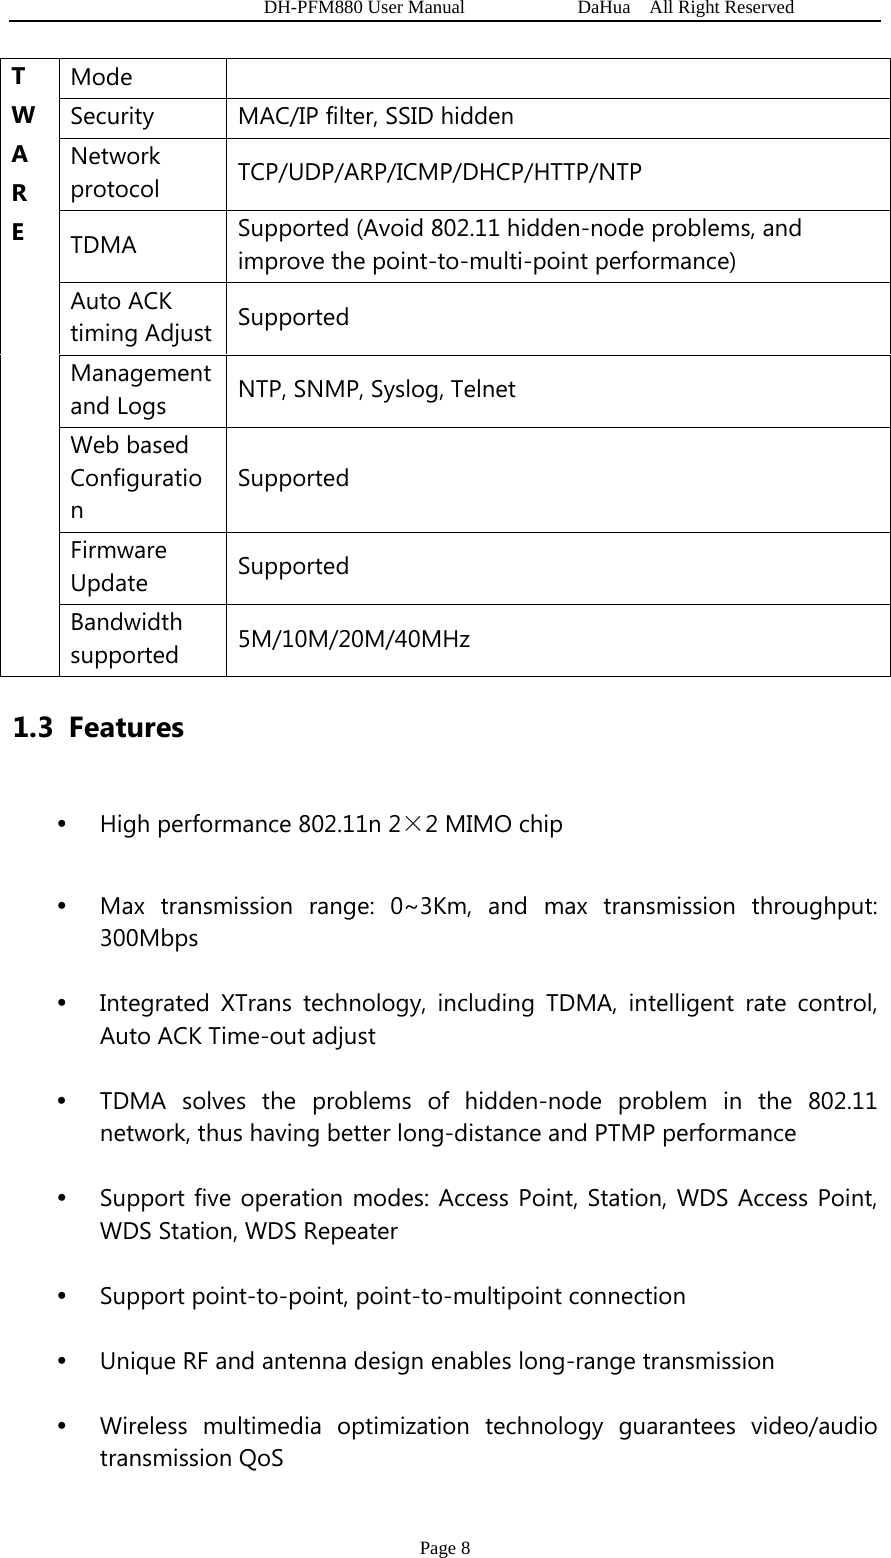   DH-PFM880 User Manual            DaHua  All Right Reserved Page 8 T W A R E Mode Security  MAC/IP filter, SSID hidden Network protocol  TCP/UDP/ARP/ICMP/DHCP/HTTP/NTP TDMA   Supported (Avoid 802.11 hidden-node problems, and improve the point-to-multi-point performance) Auto ACK timing Adjust  Supported Management and Logs  NTP, SNMP, Syslog, Telnet Web based Configuration Supported Firmware Update  Supported Bandwidth supported  5M/10M/20M/40MHz 1.3 Features y High performance 802.11n 2×2 MIMO chip y Max transmission range: 0~3Km, and max transmission throughput: 300Mbps y Integrated XTrans technology, including TDMA, intelligent rate control, Auto ACK Time-out adjust   y TDMA solves the problems of hidden-node problem in the 802.11 network, thus having better long-distance and PTMP performance y Support five operation modes: Access Point, Station, WDS Access Point, WDS Station, WDS Repeater y Support point-to-point, point-to-multipoint connection y Unique RF and antenna design enables long-range transmission y Wireless multimedia optimization technology guarantees video/audio transmission QoS 